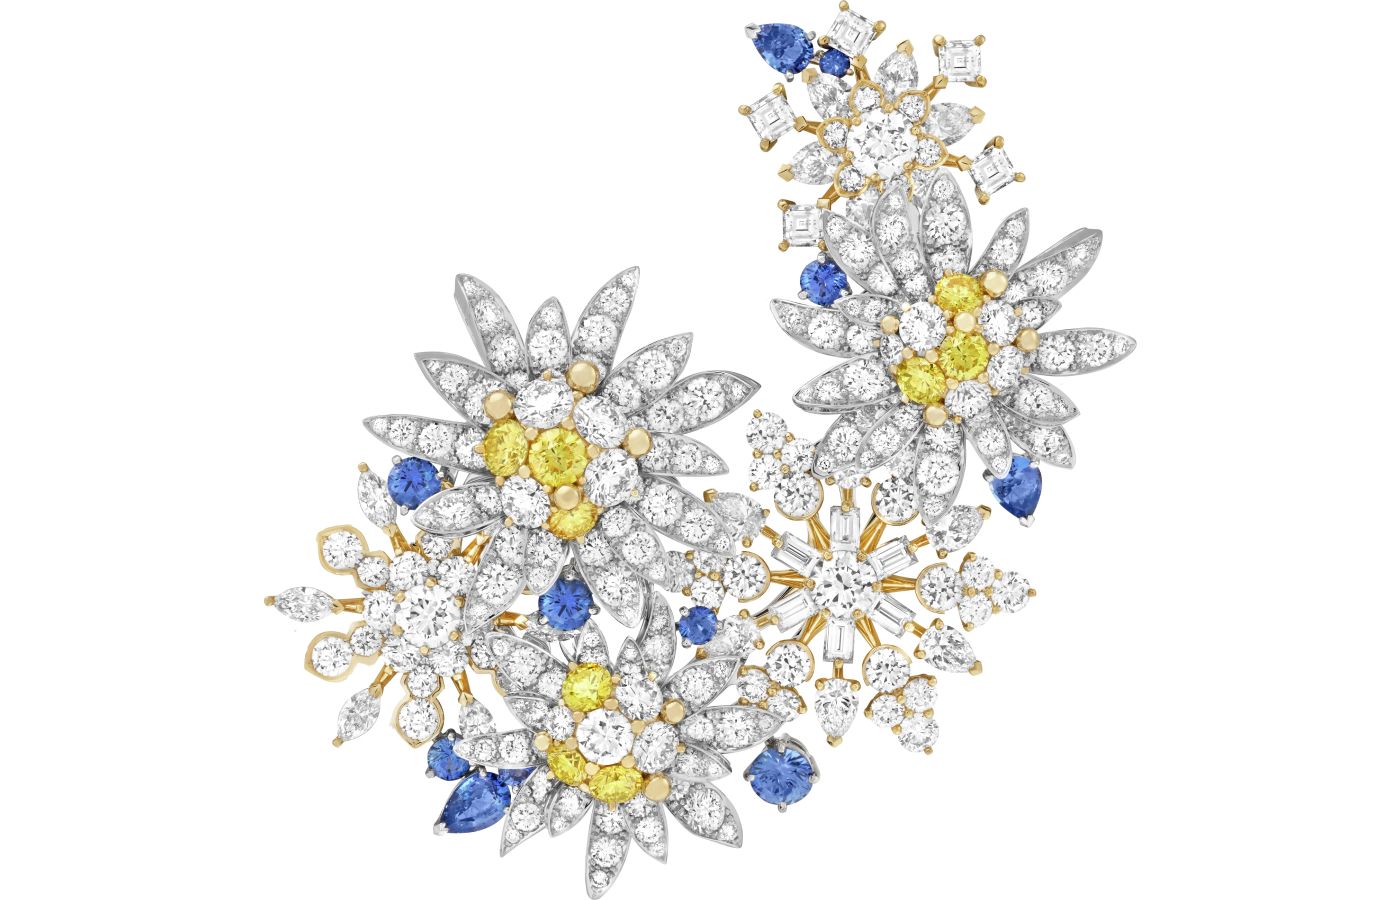 Van Cleef & Arpels Étoile des Glaciers clip in gold, white gold, sapphires, white and yellow diamonds from Le Grand Tour High Jewellery collection